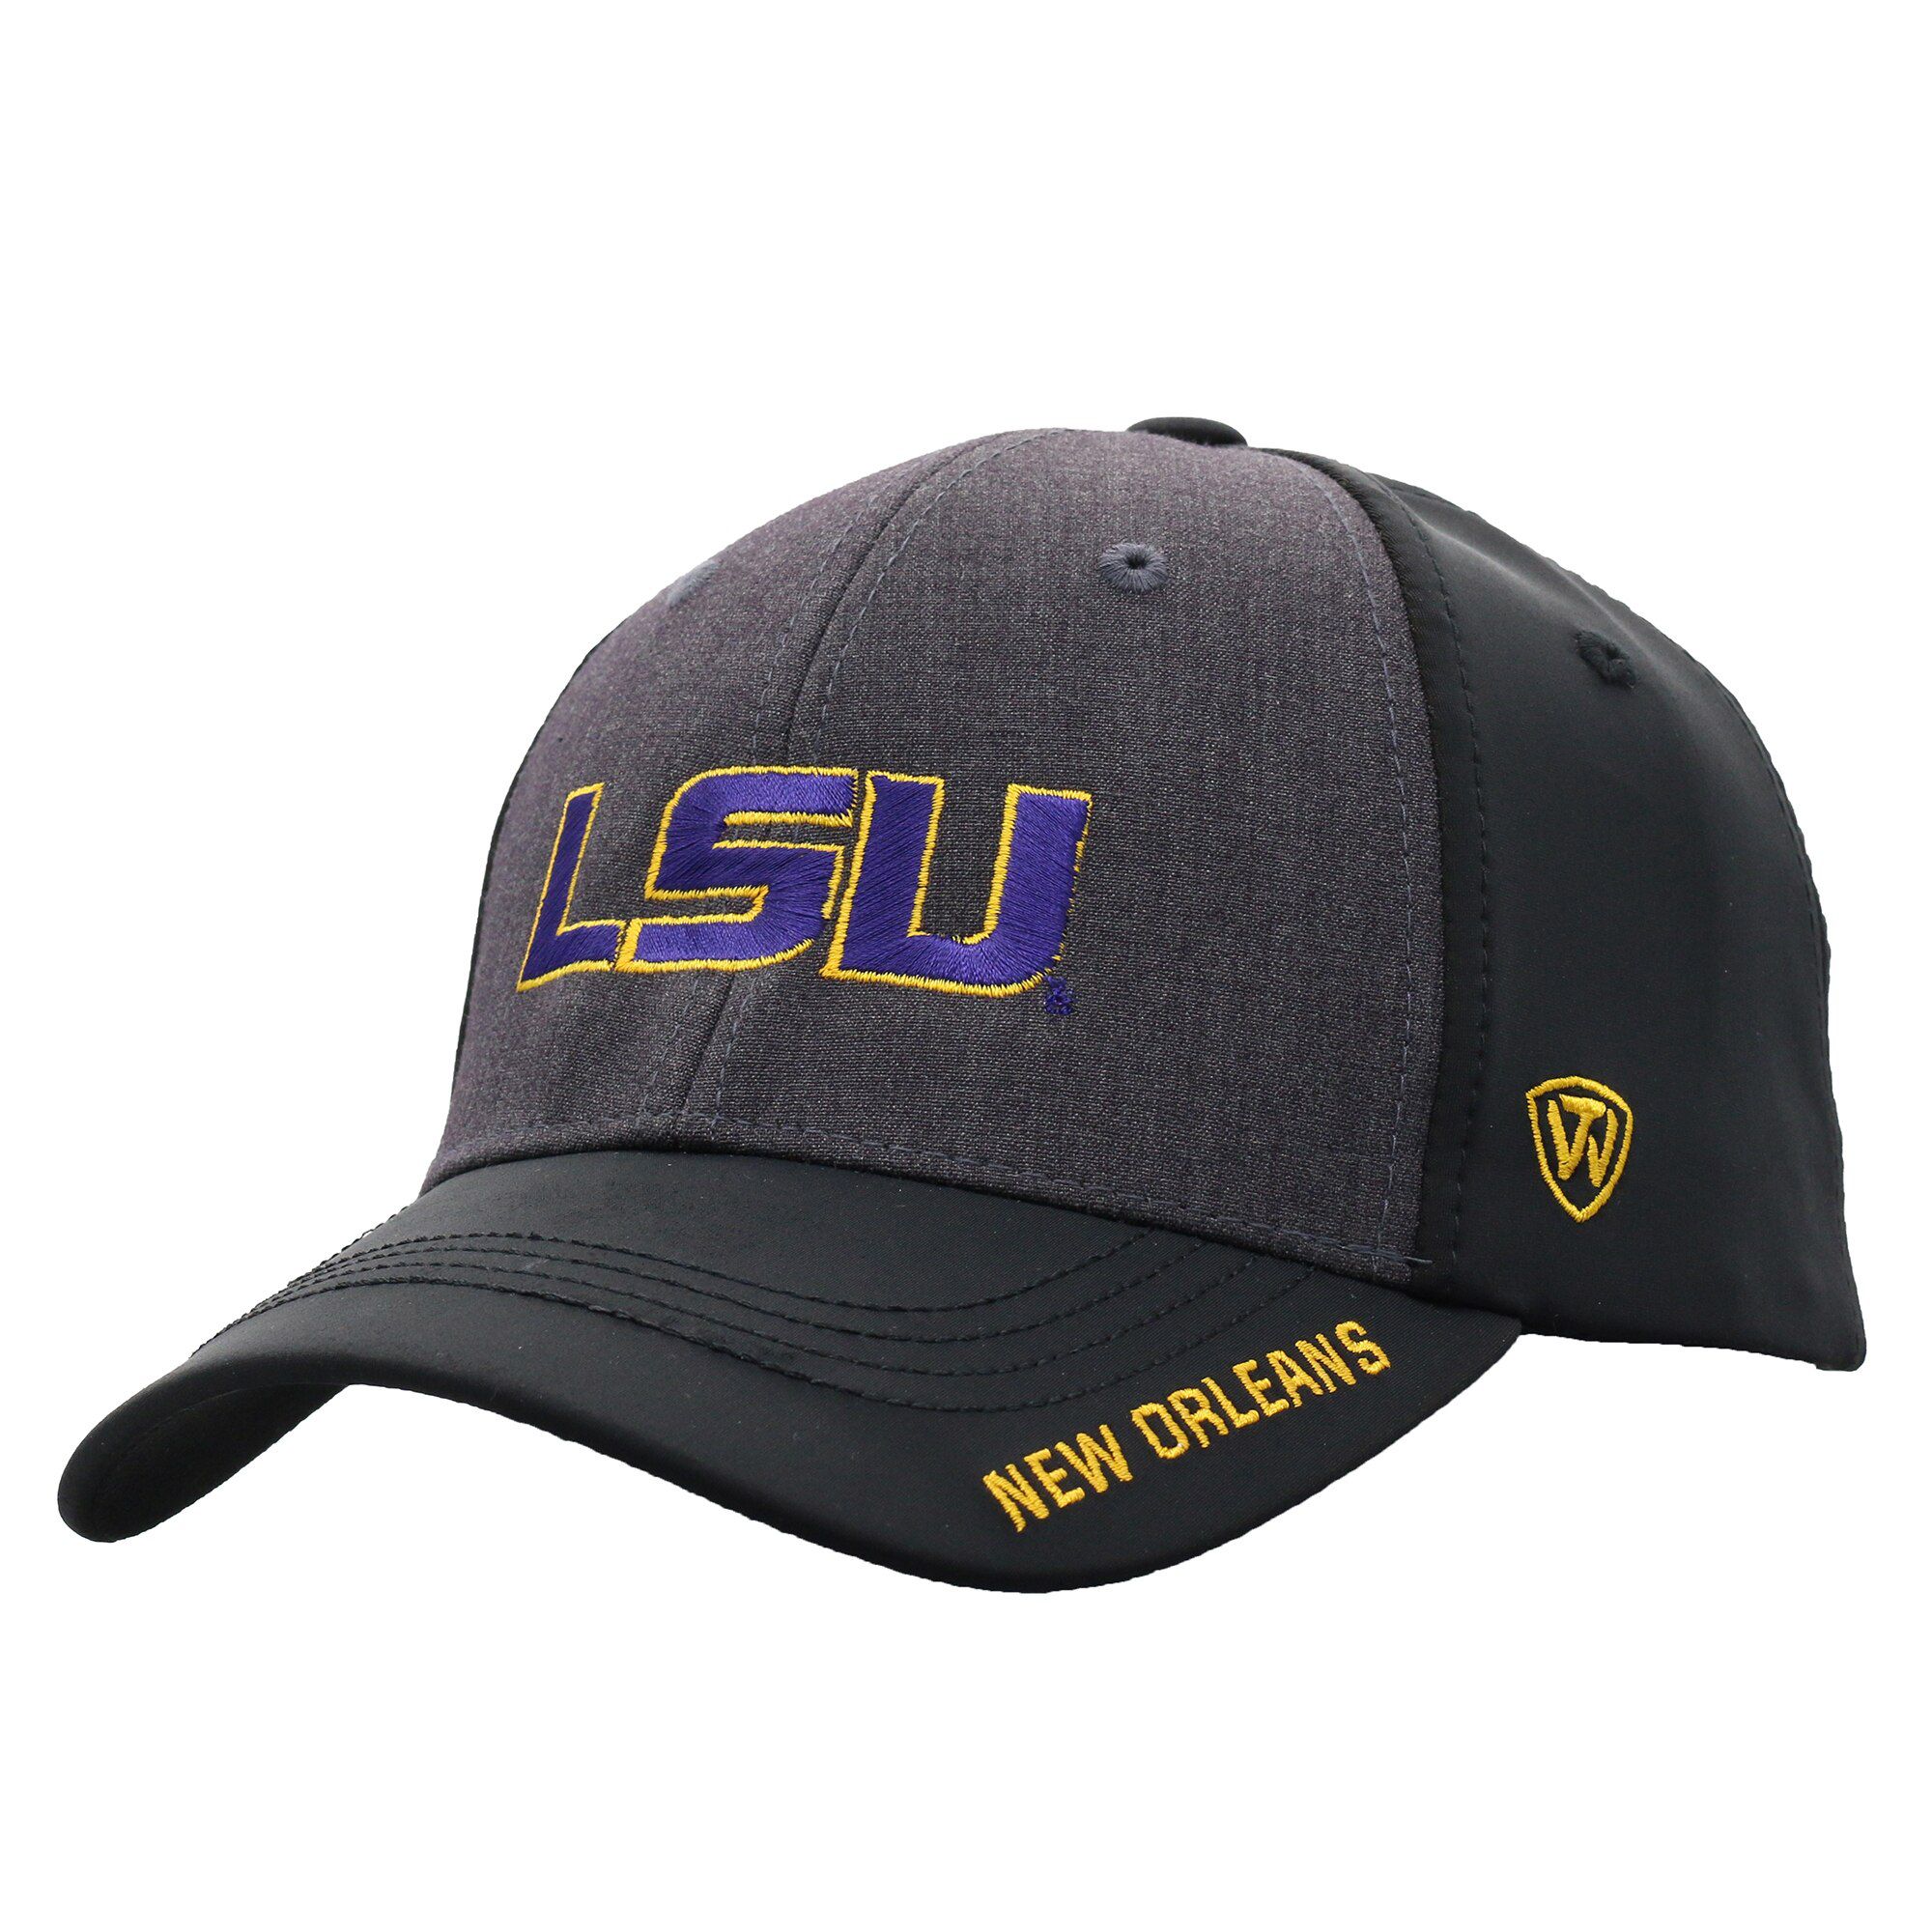 Celebrate the LSU Tigers CFP national title with new merch and